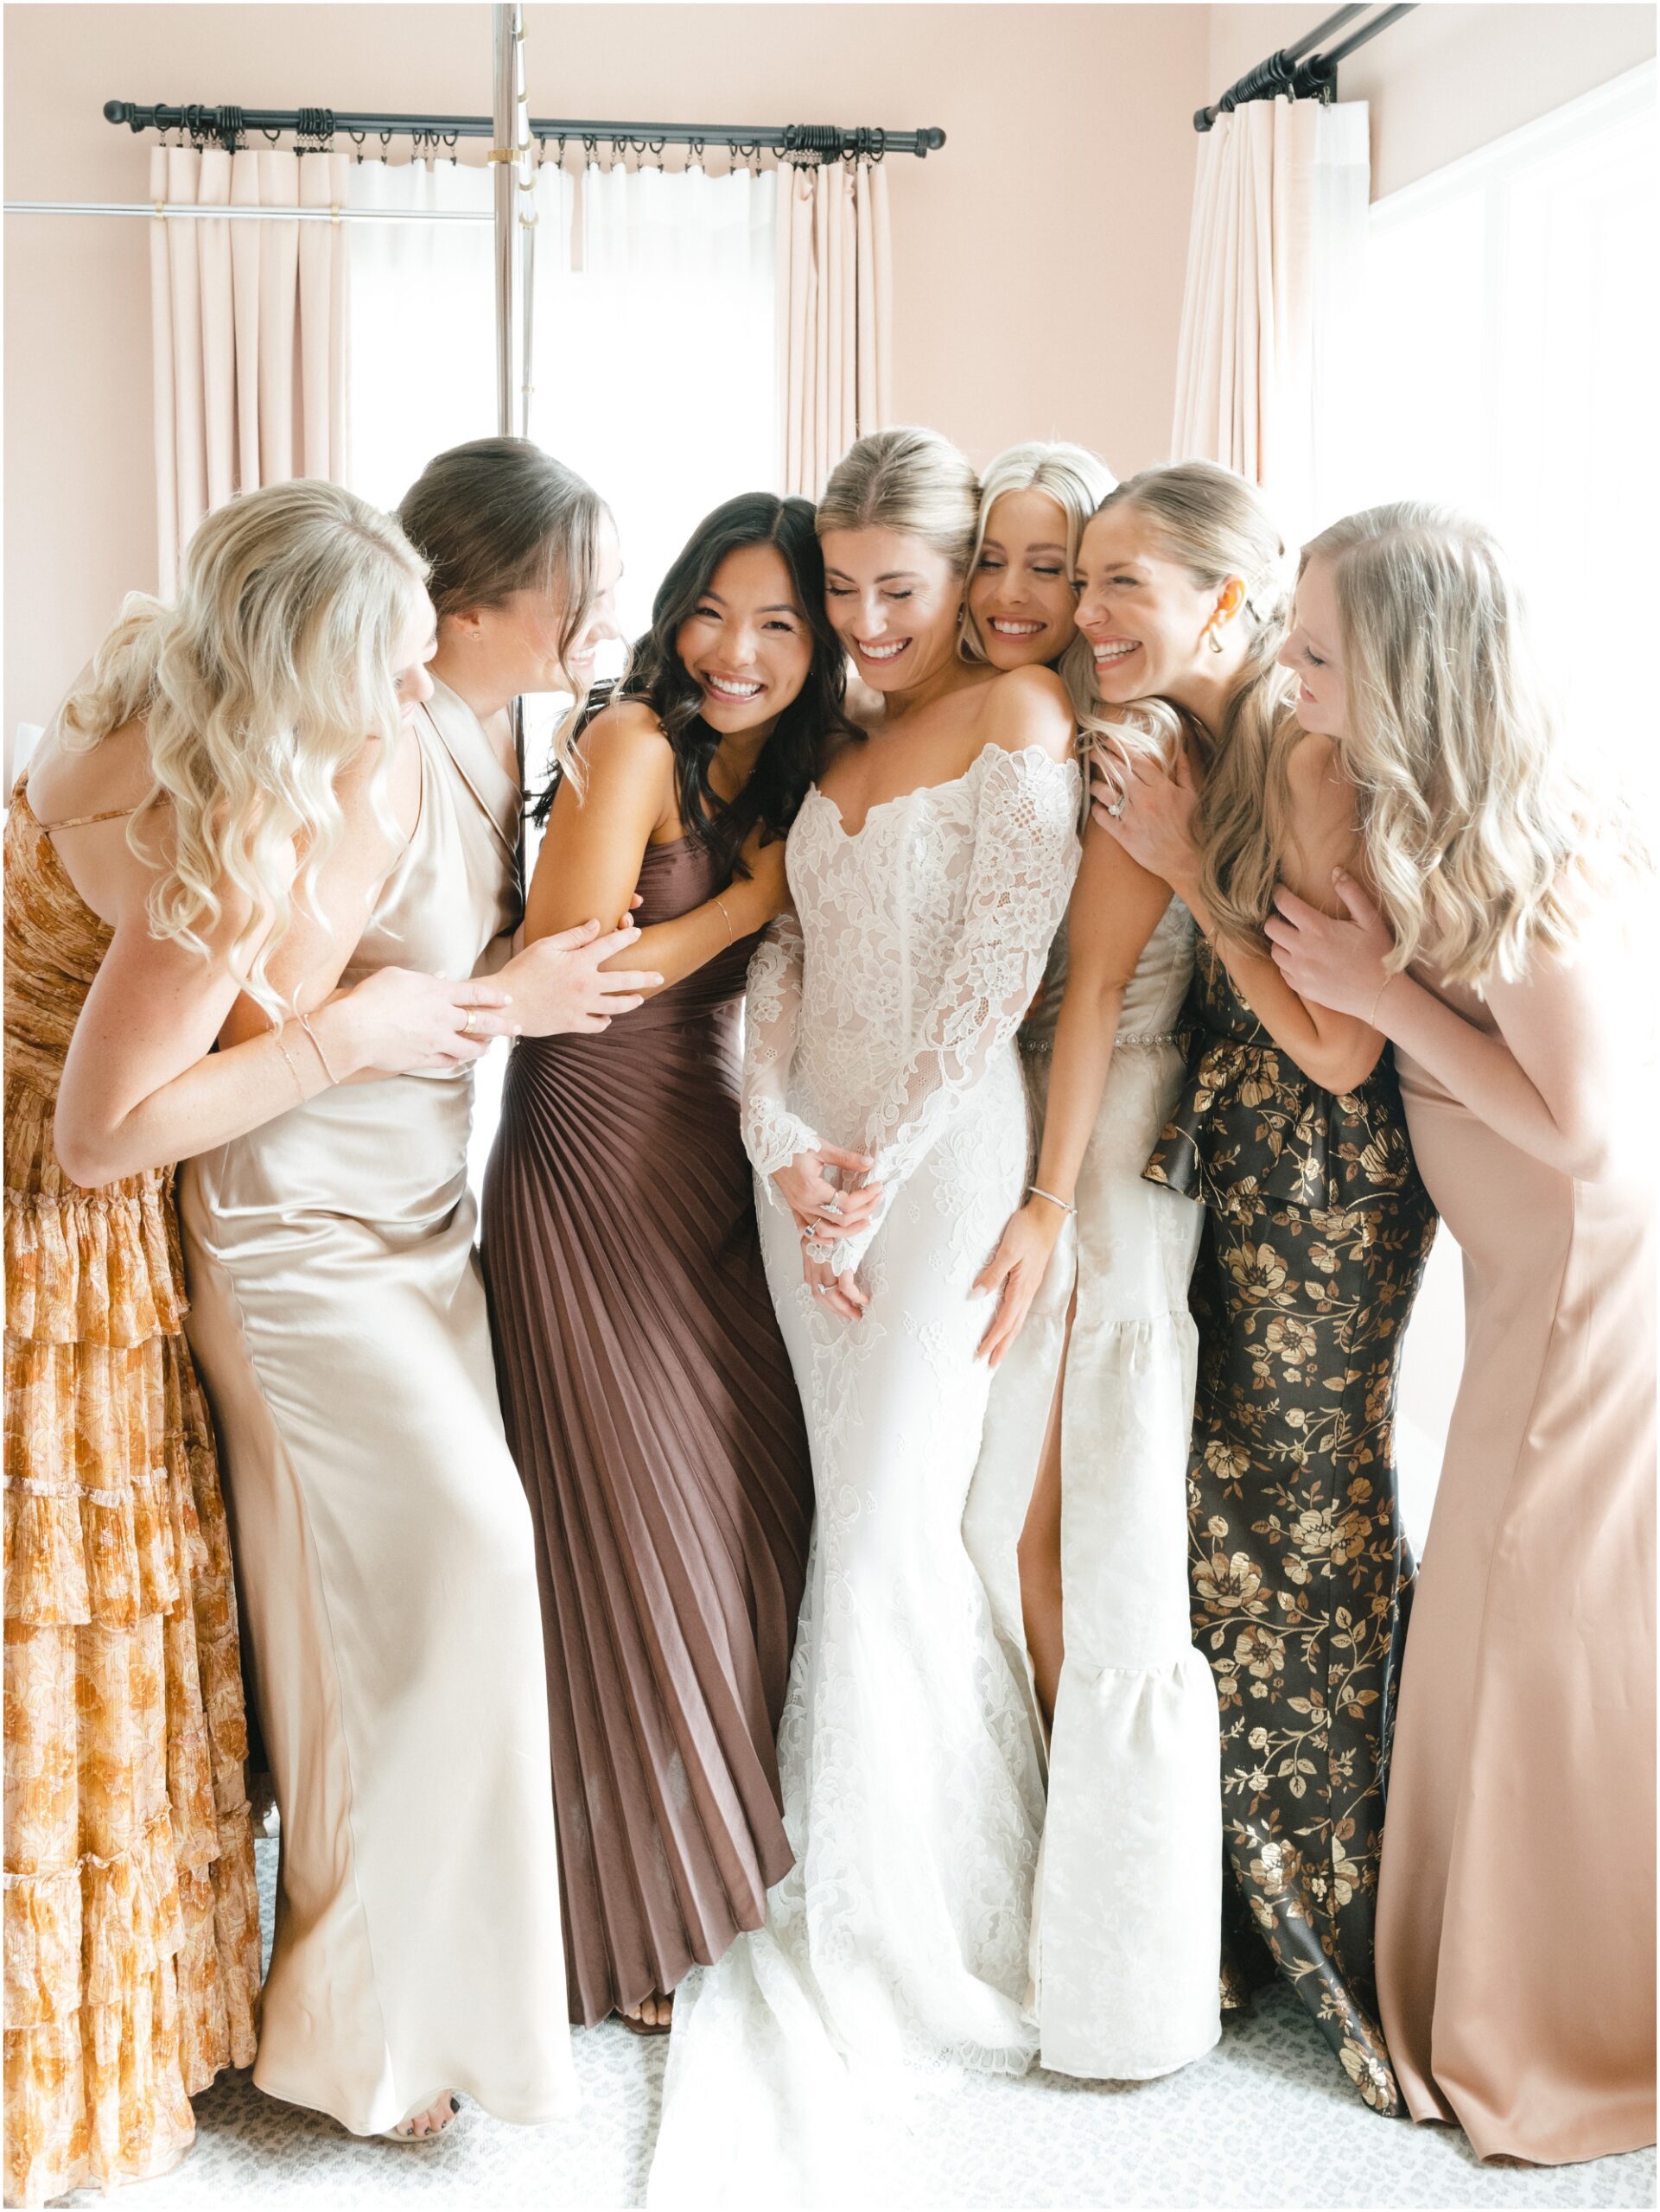 bride does first look with bridesmaids at commodore perry estate in austin texas while bridesmaids wear different dresses